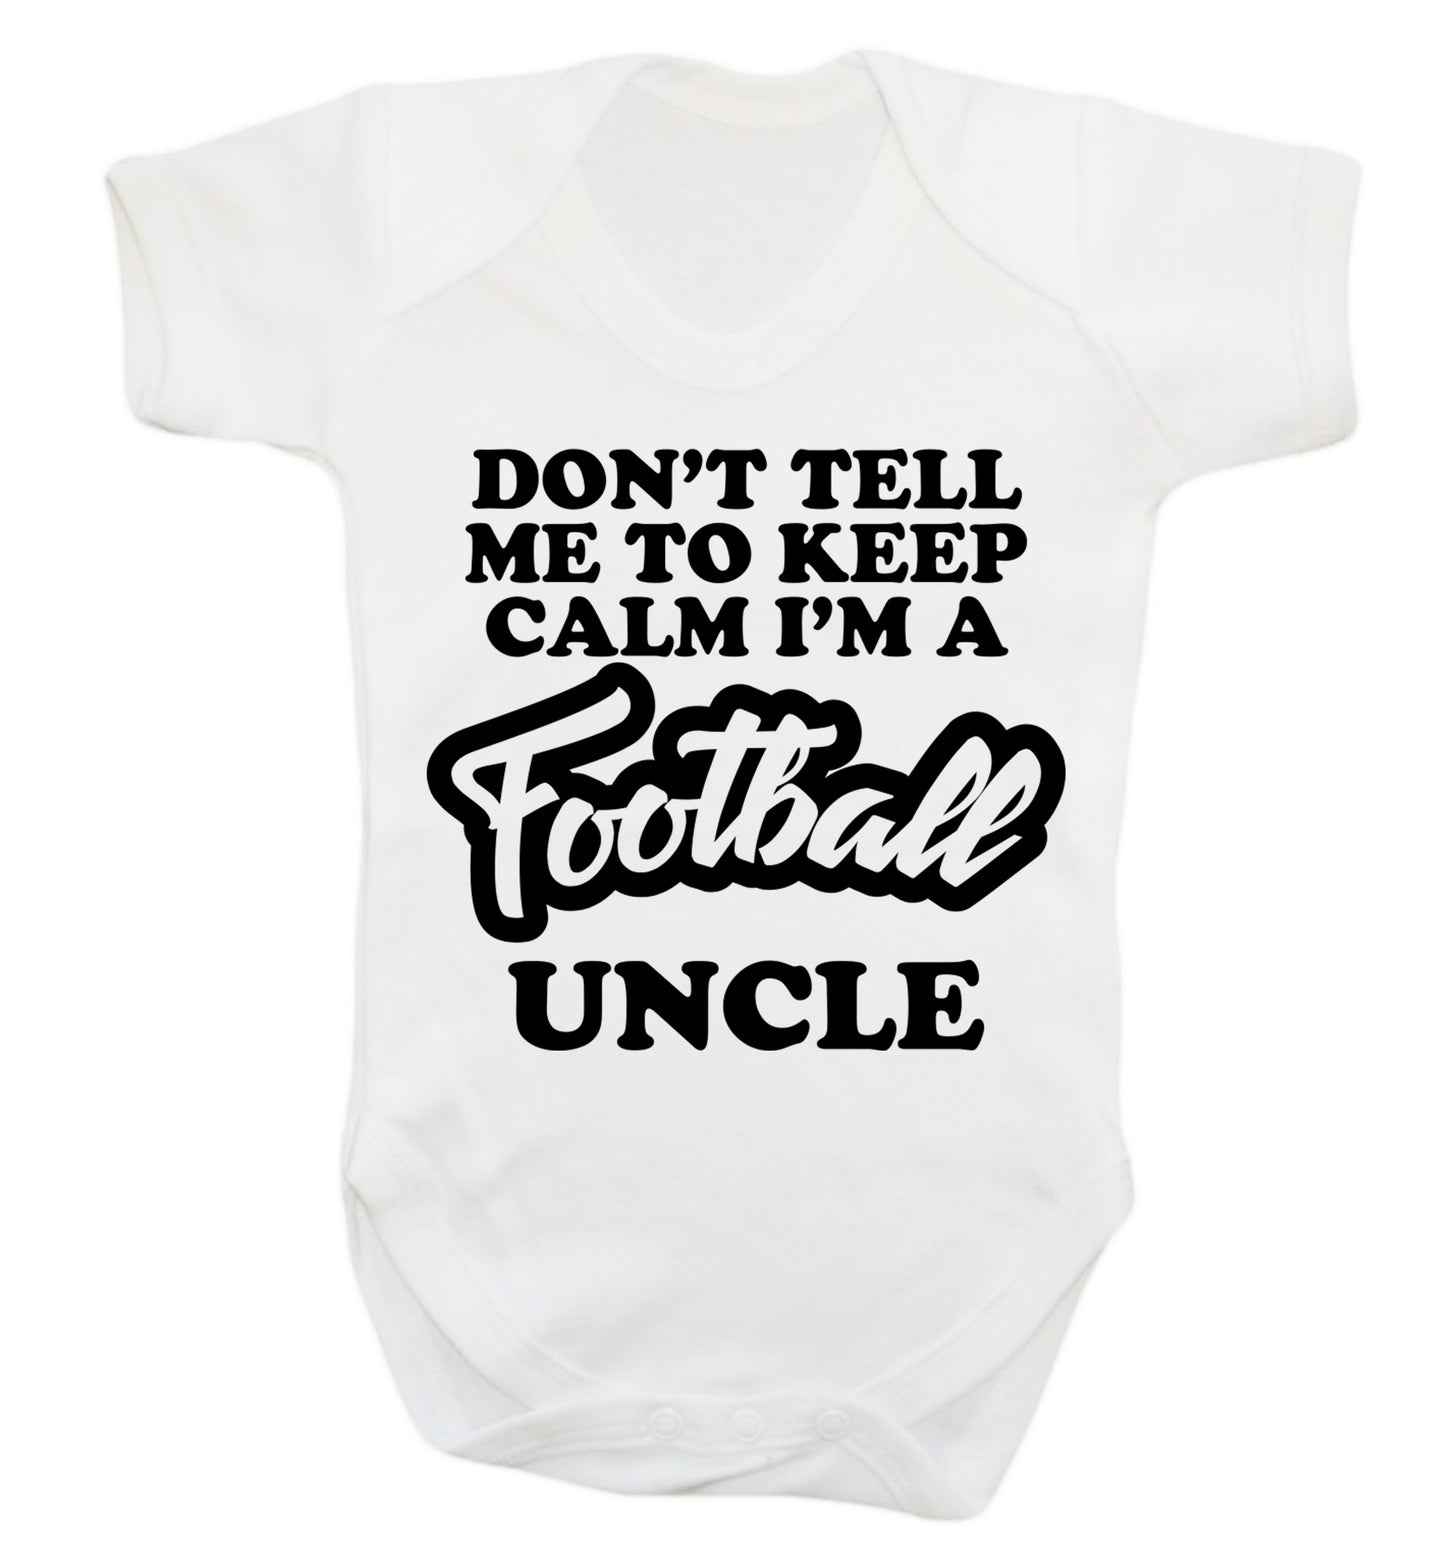 Don't tell me to keep calm I'm a football uncle Baby Vest white 18-24 months